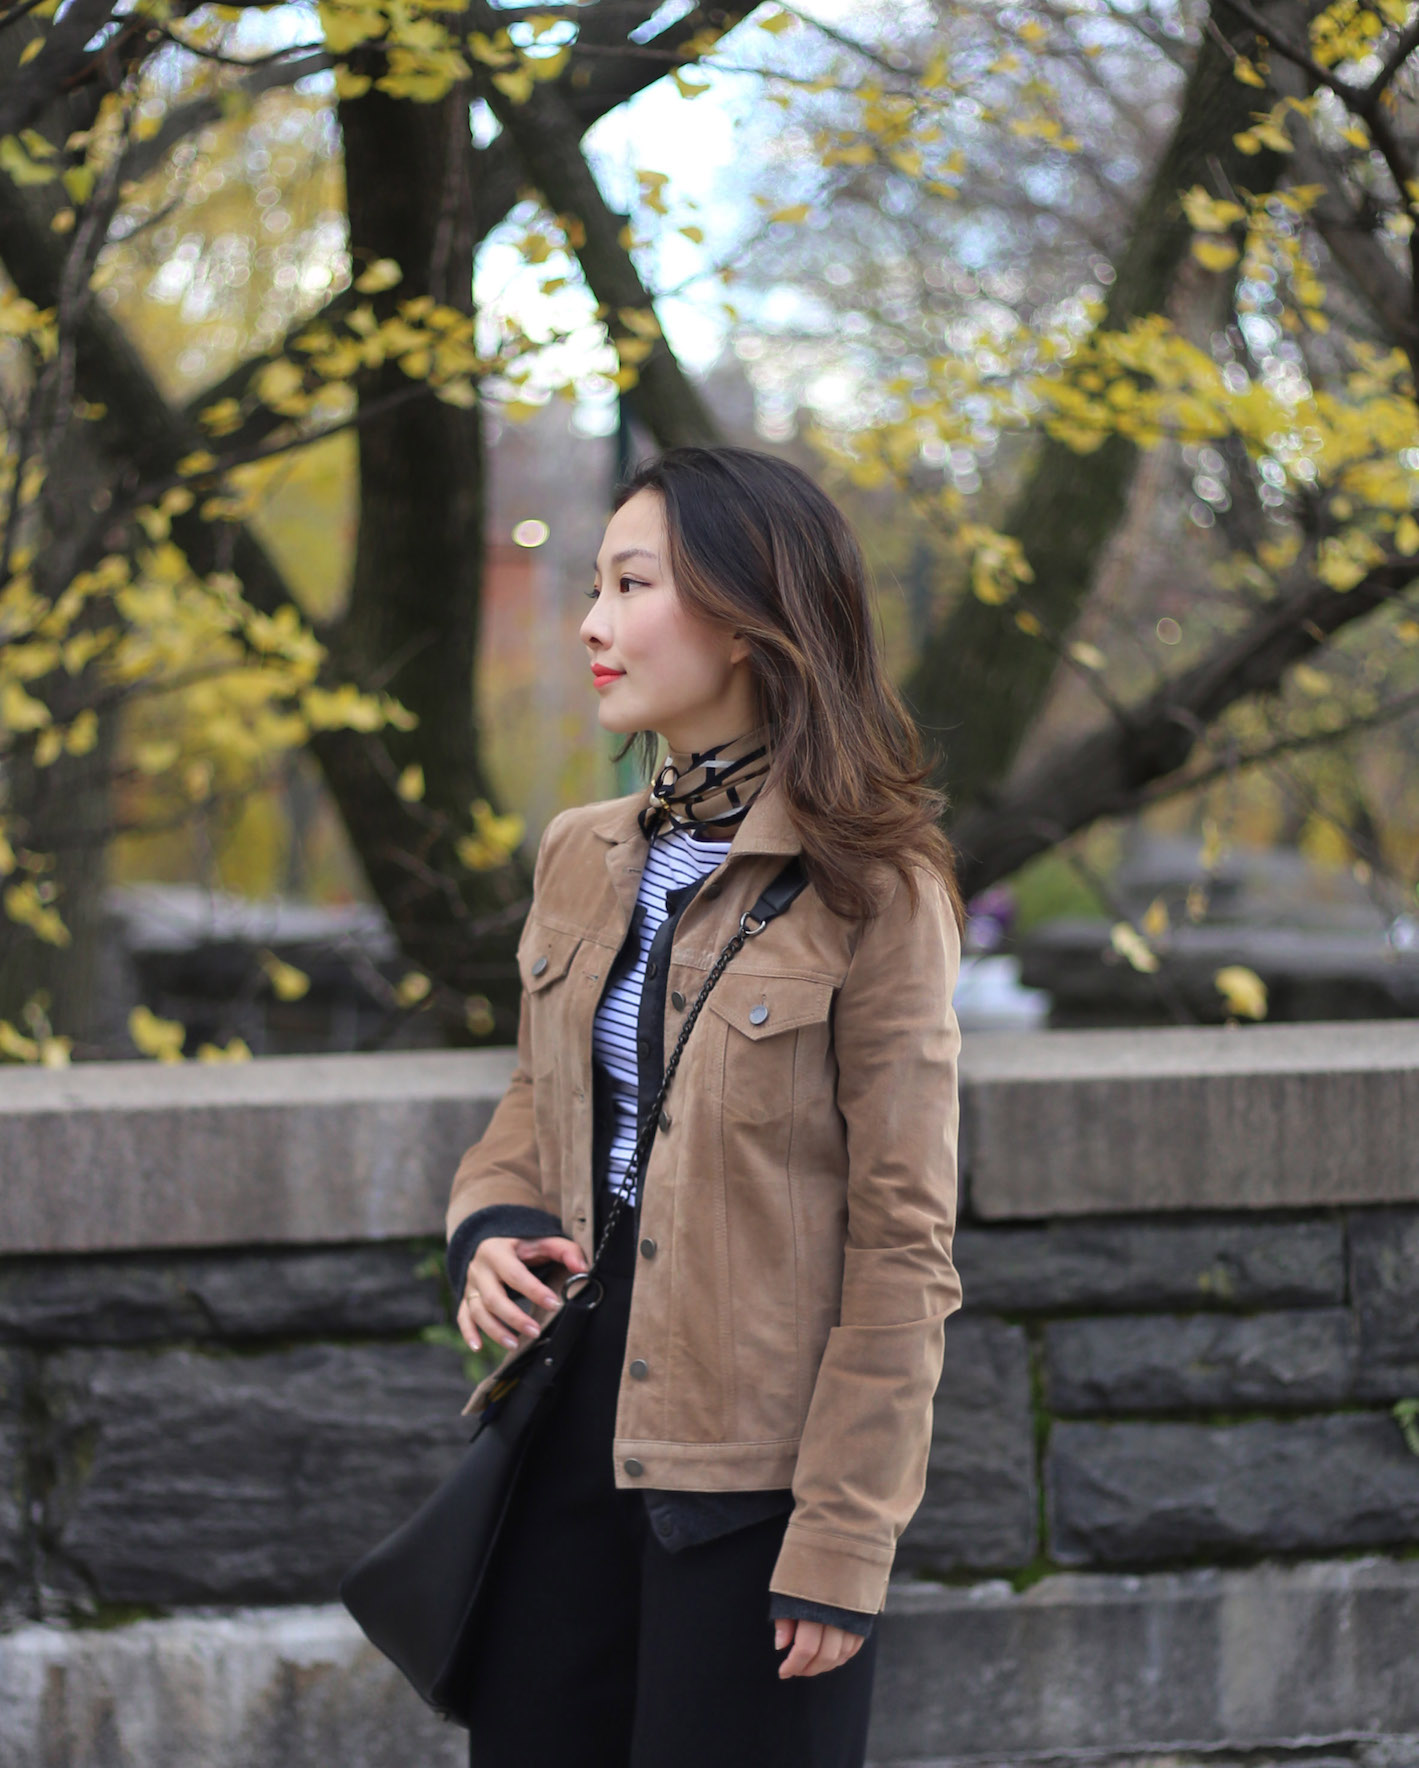 tan suede leather jacket outfit.JPG